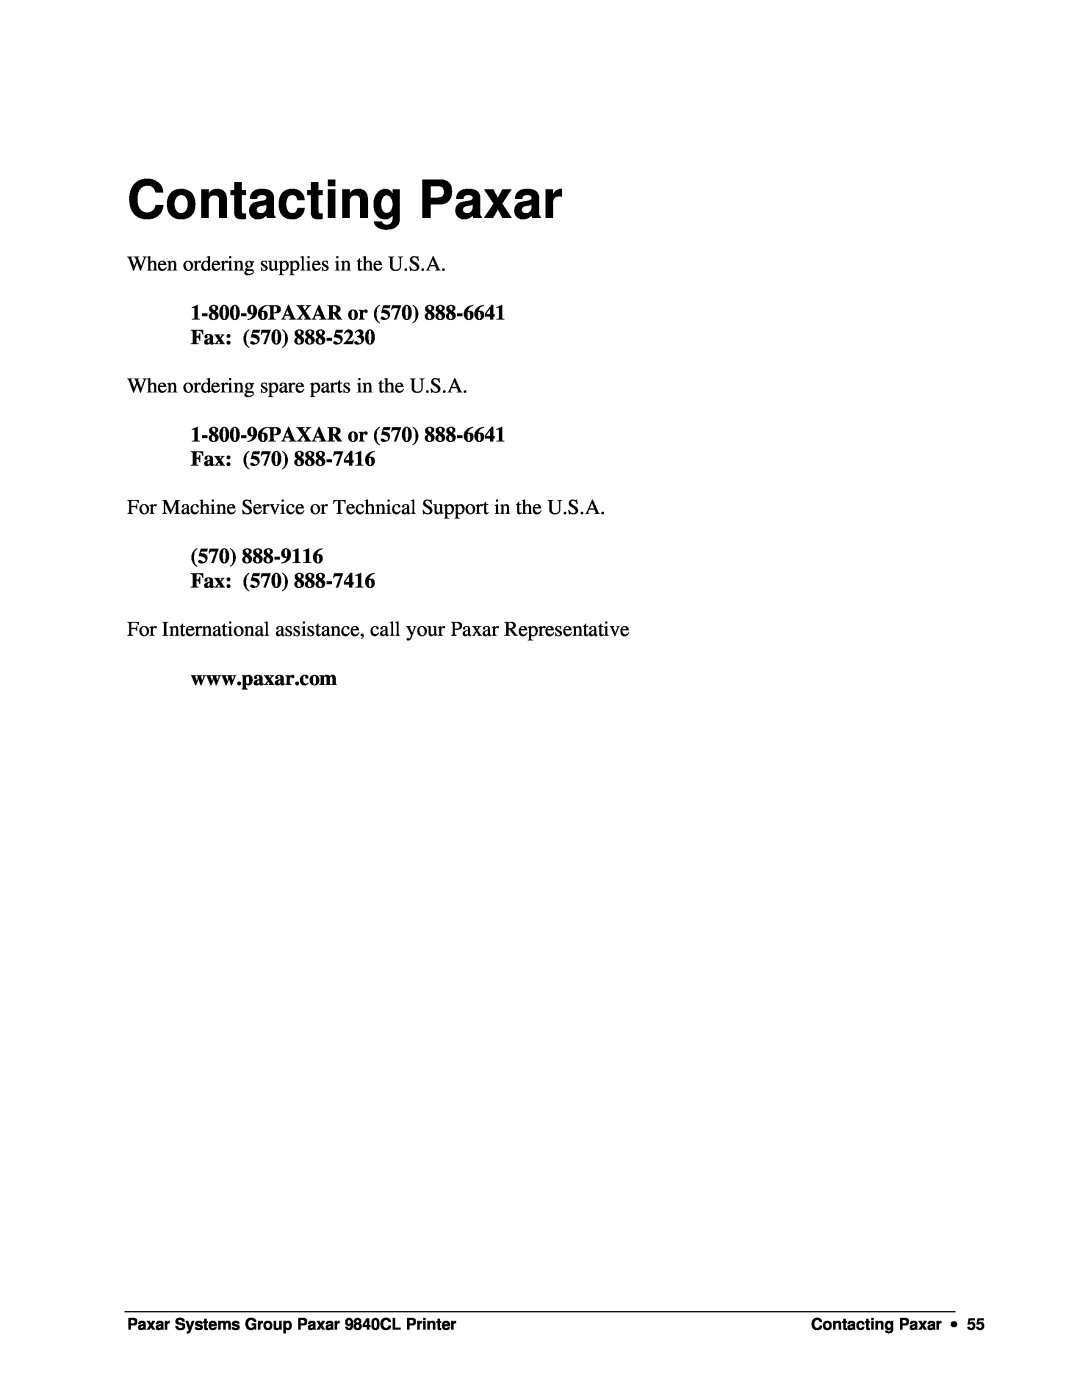 Paxar 9840CL user manual Contacting Paxar, When ordering supplies in the U.S.A, When ordering spare parts in the U.S.A 